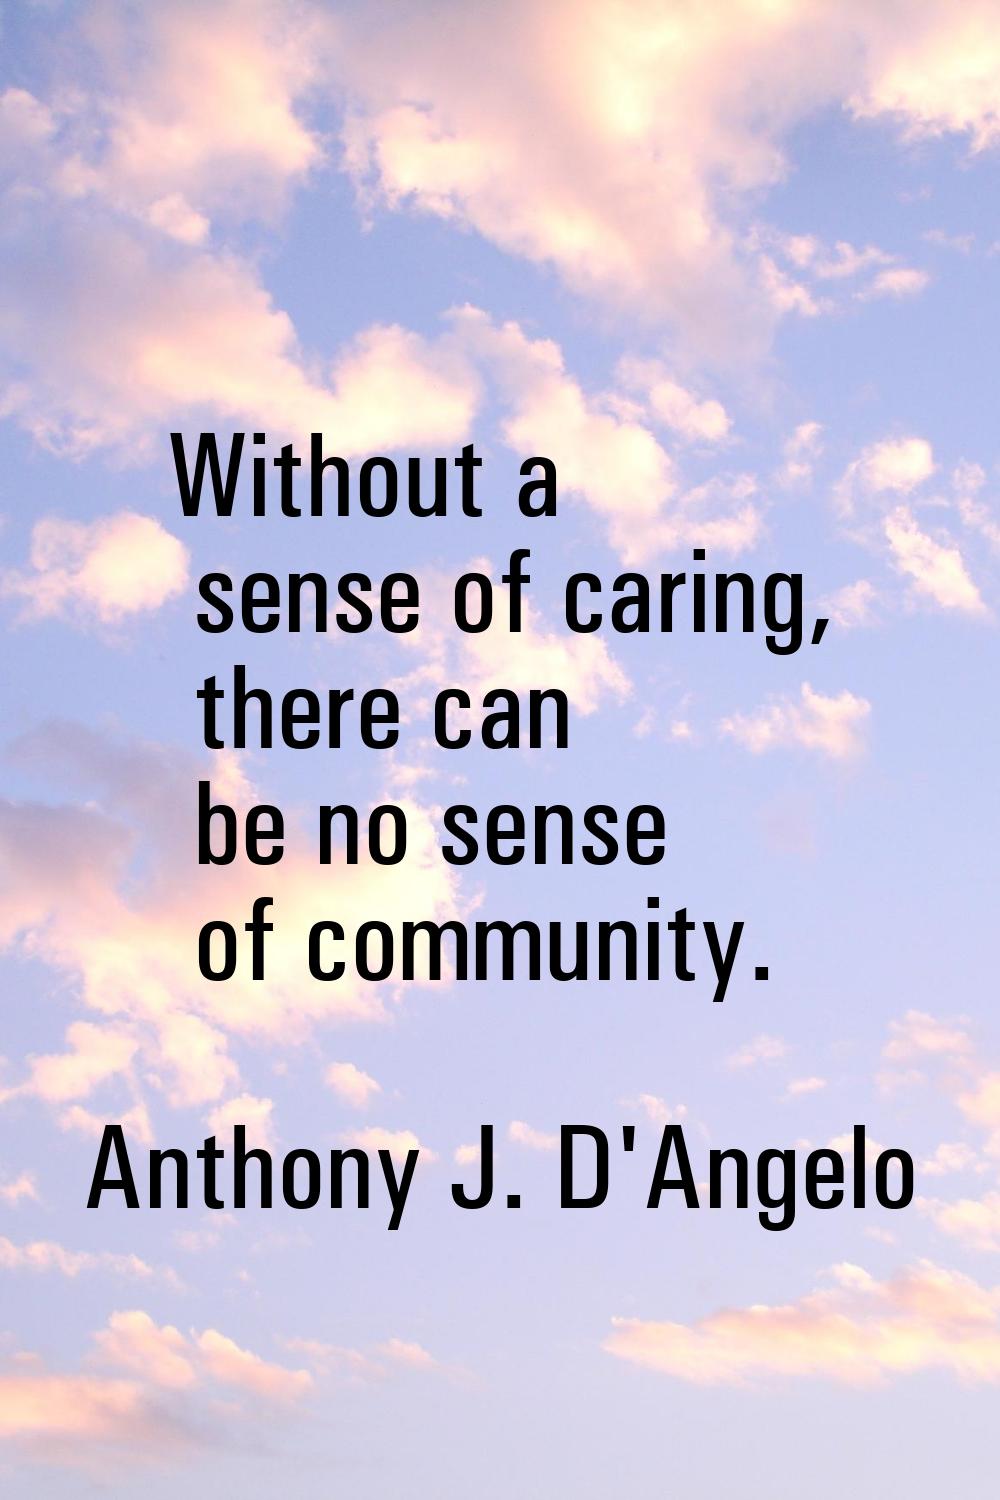 Without a sense of caring, there can be no sense of community.